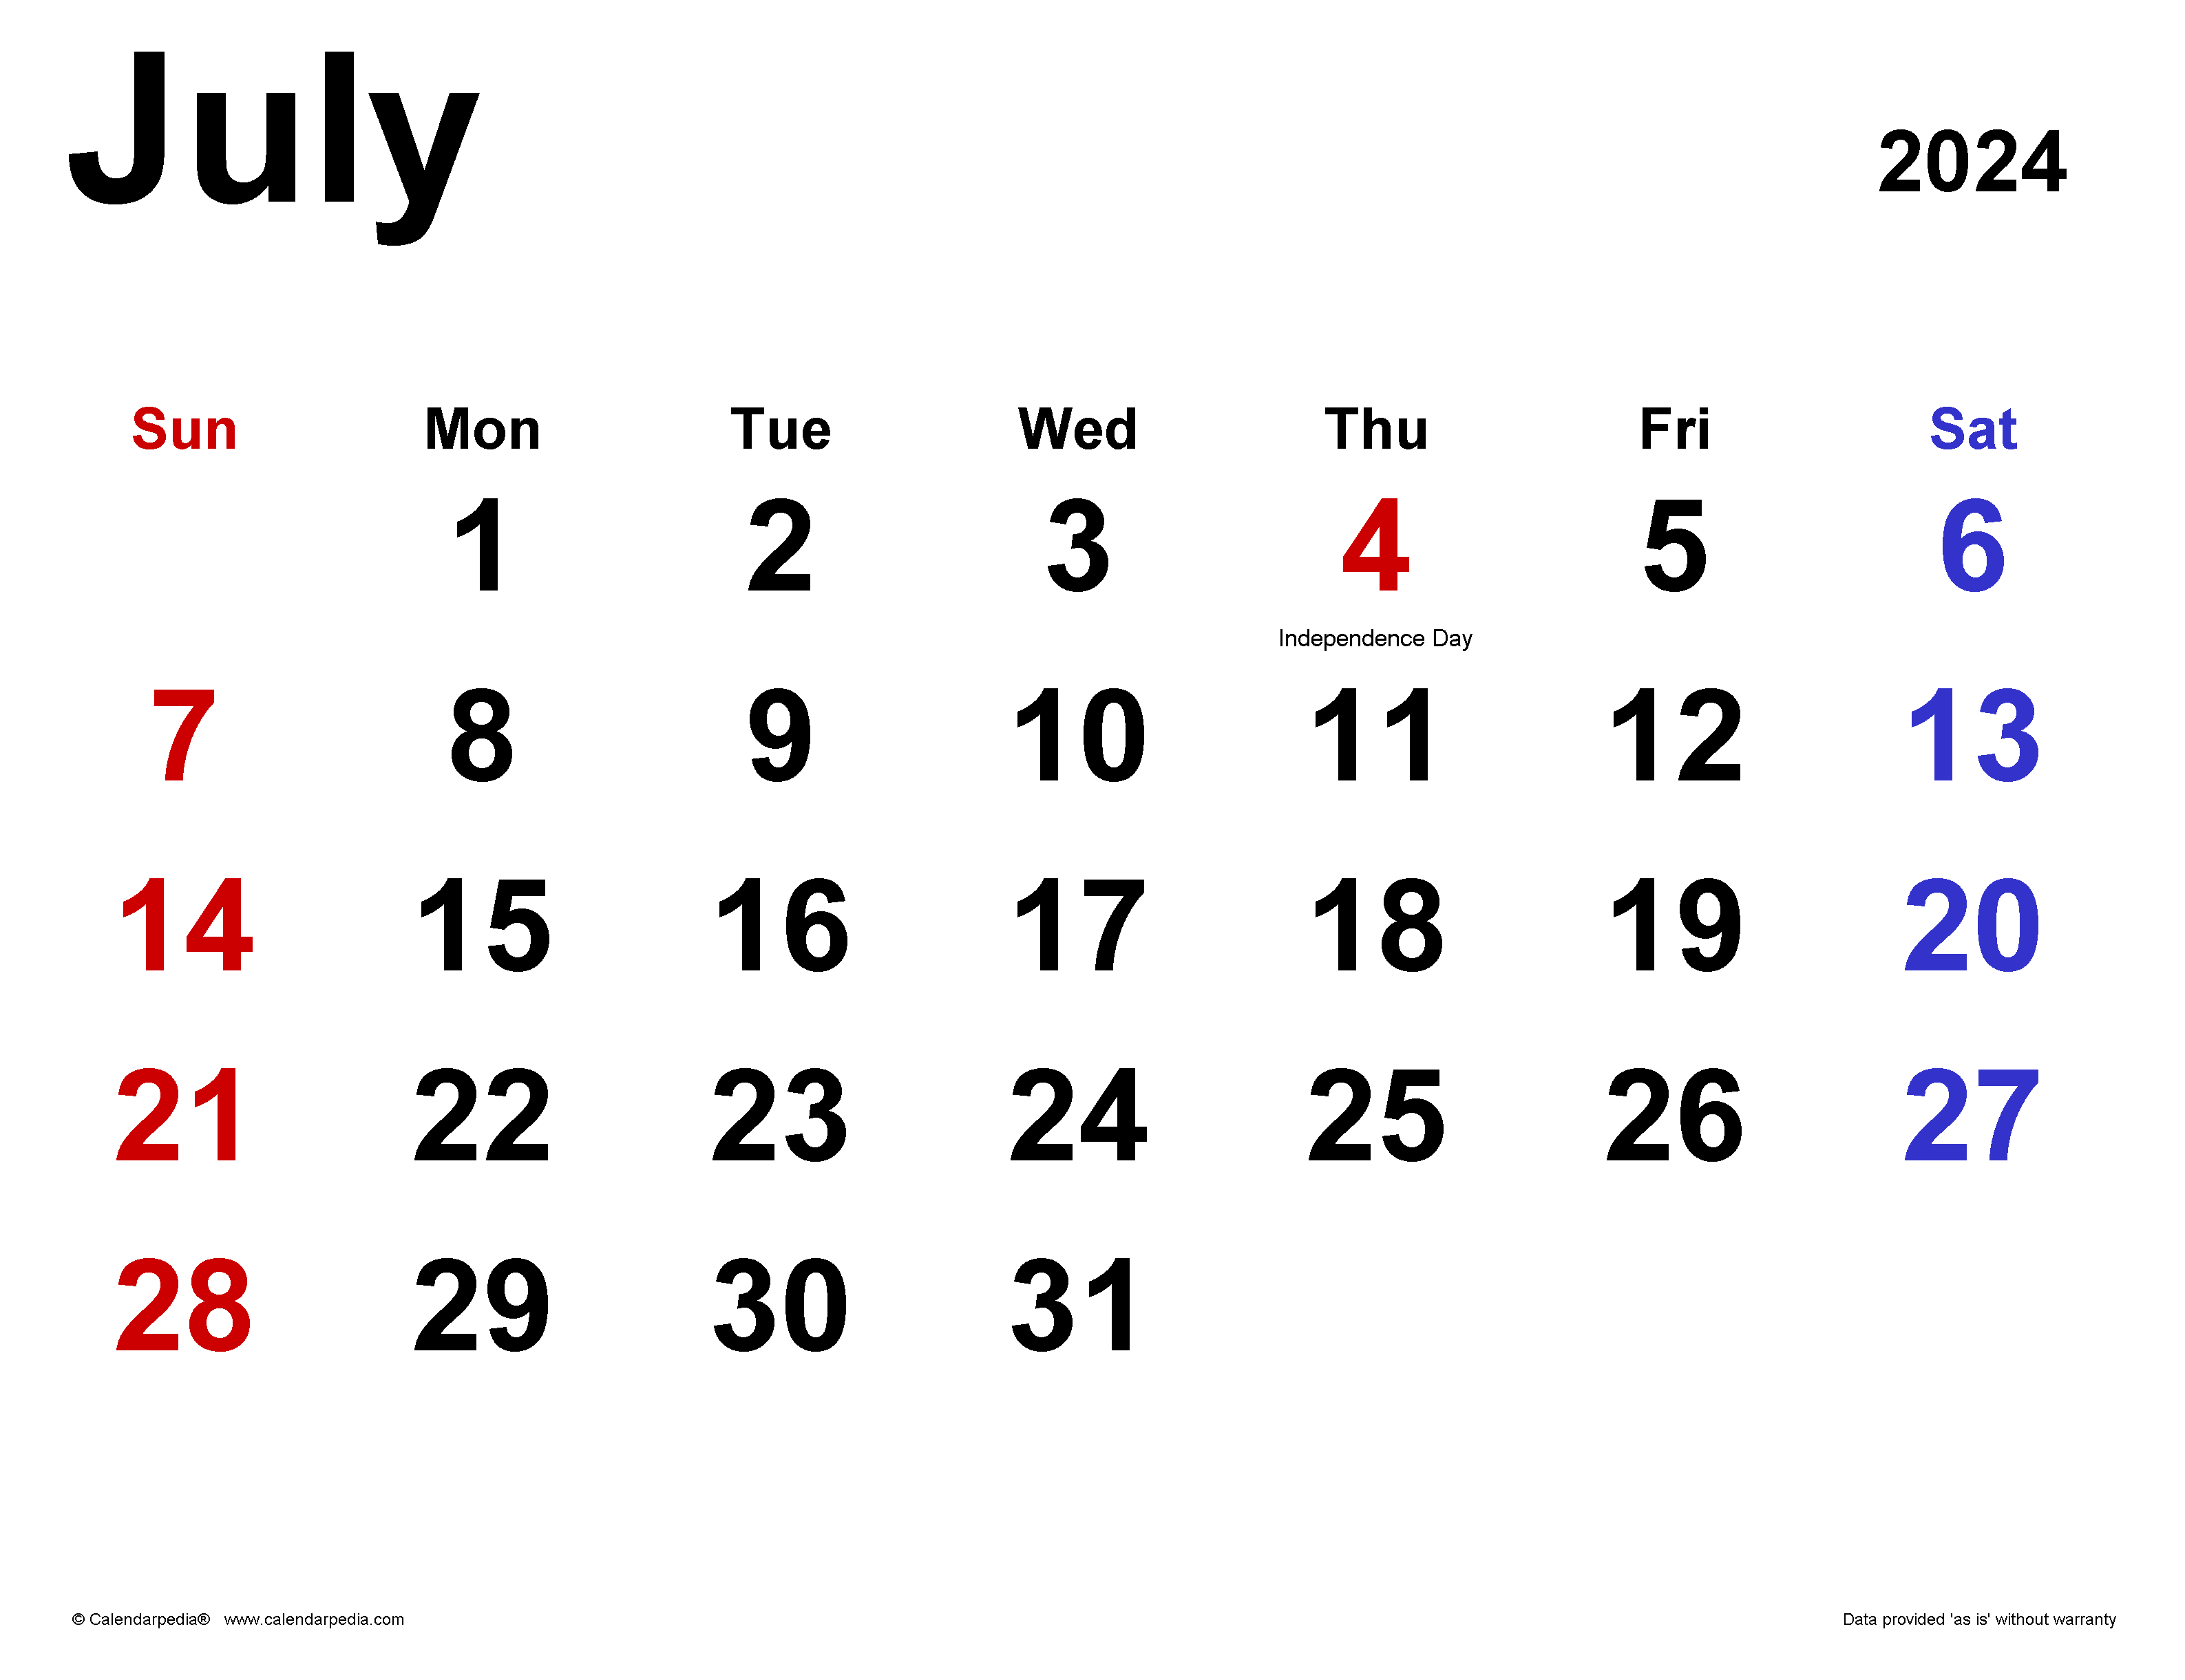 July 2024 Calendar | Templates For Word, Excel And Pdf intended for 7 Month Calendar Starting July 2024